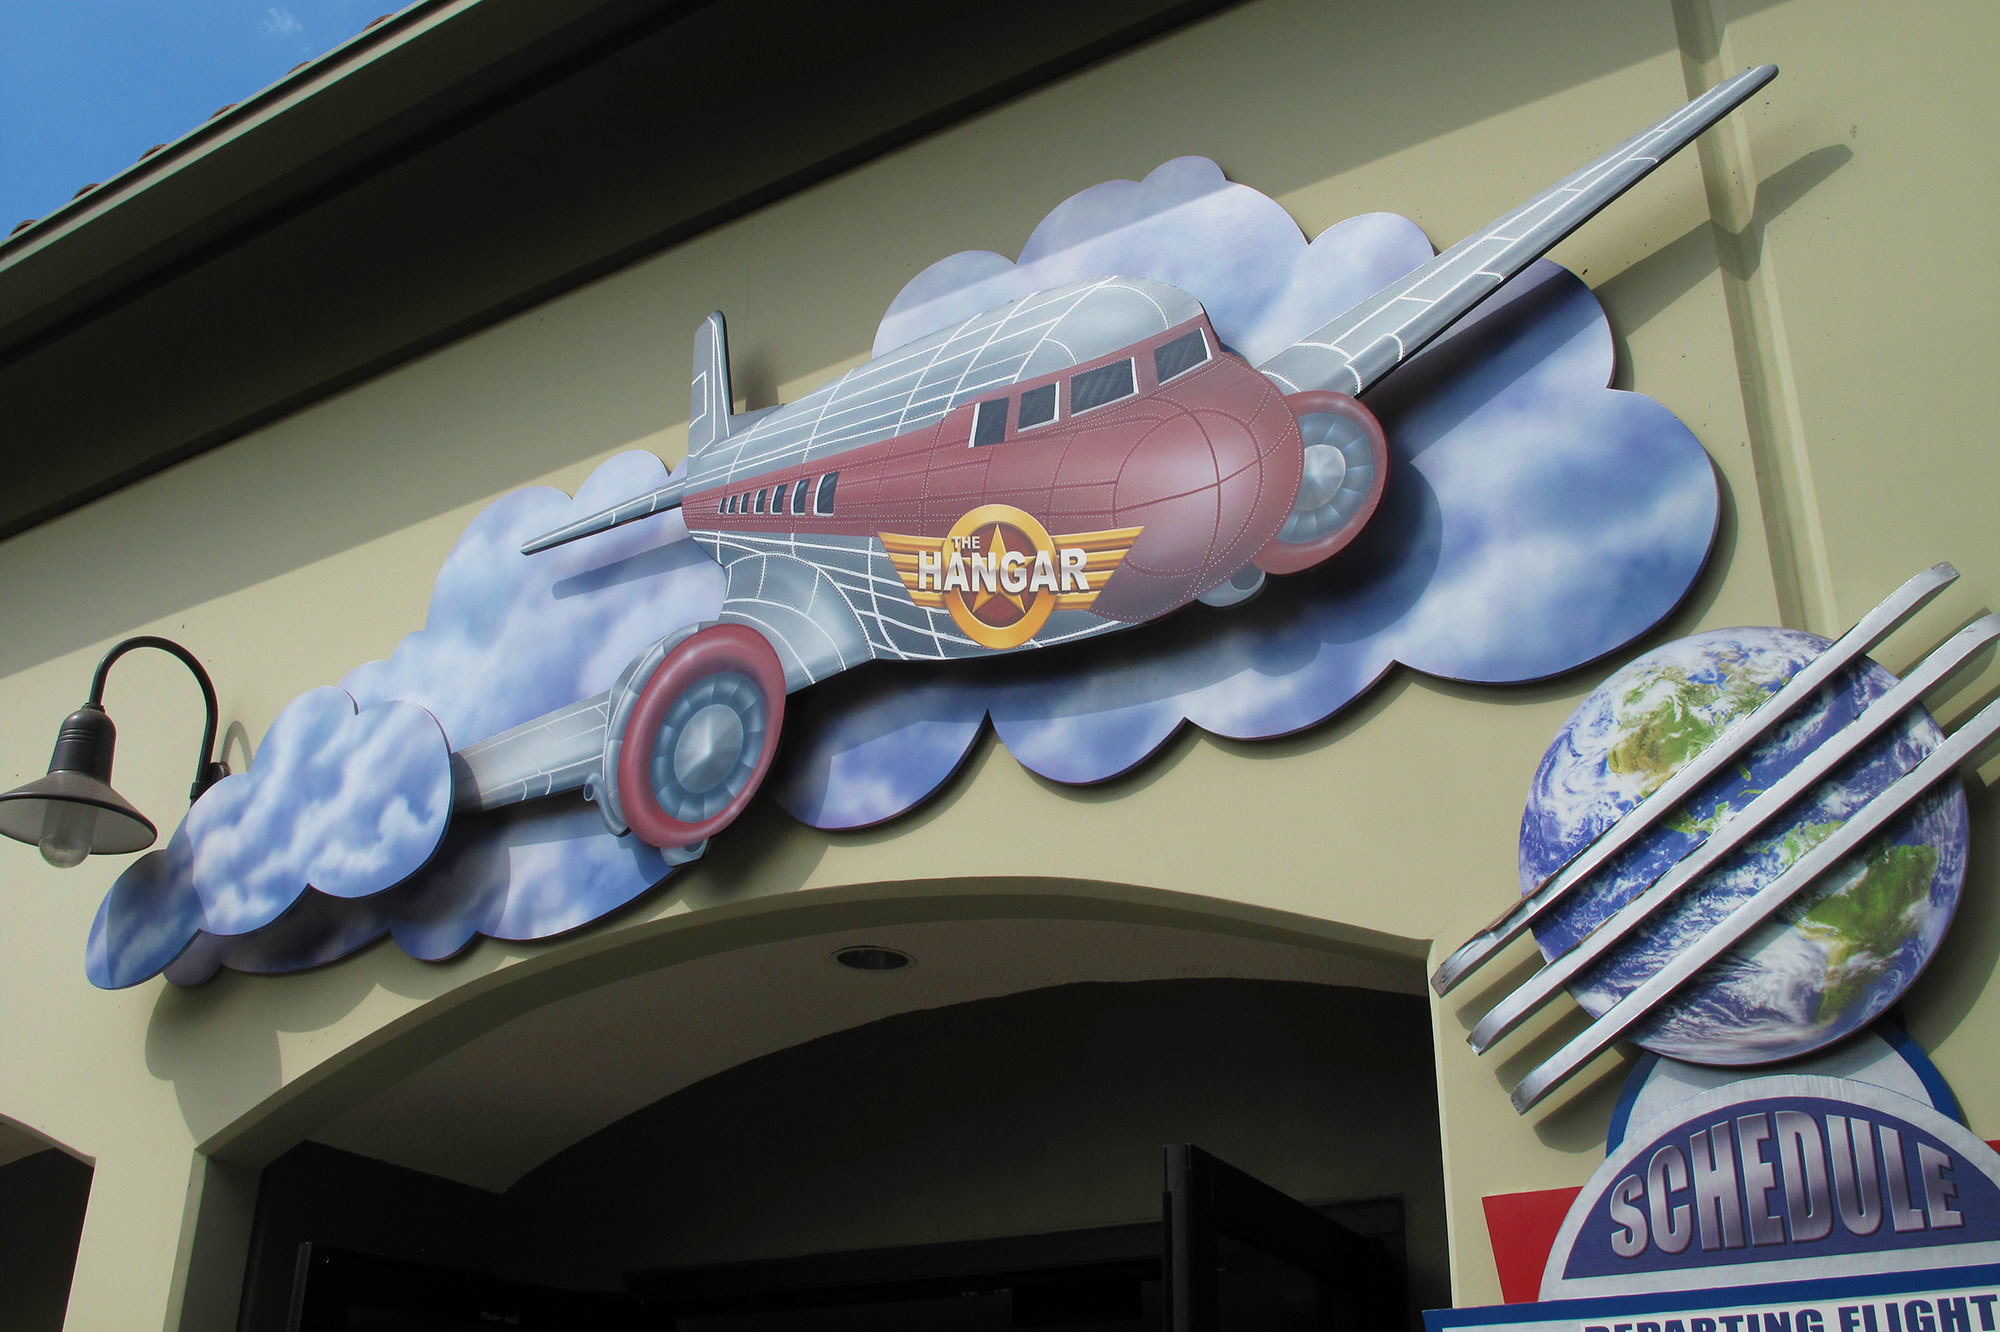 Outdoor 2D Sign with clouds and an airplane with emblem reading "The Hangar" above an entryway